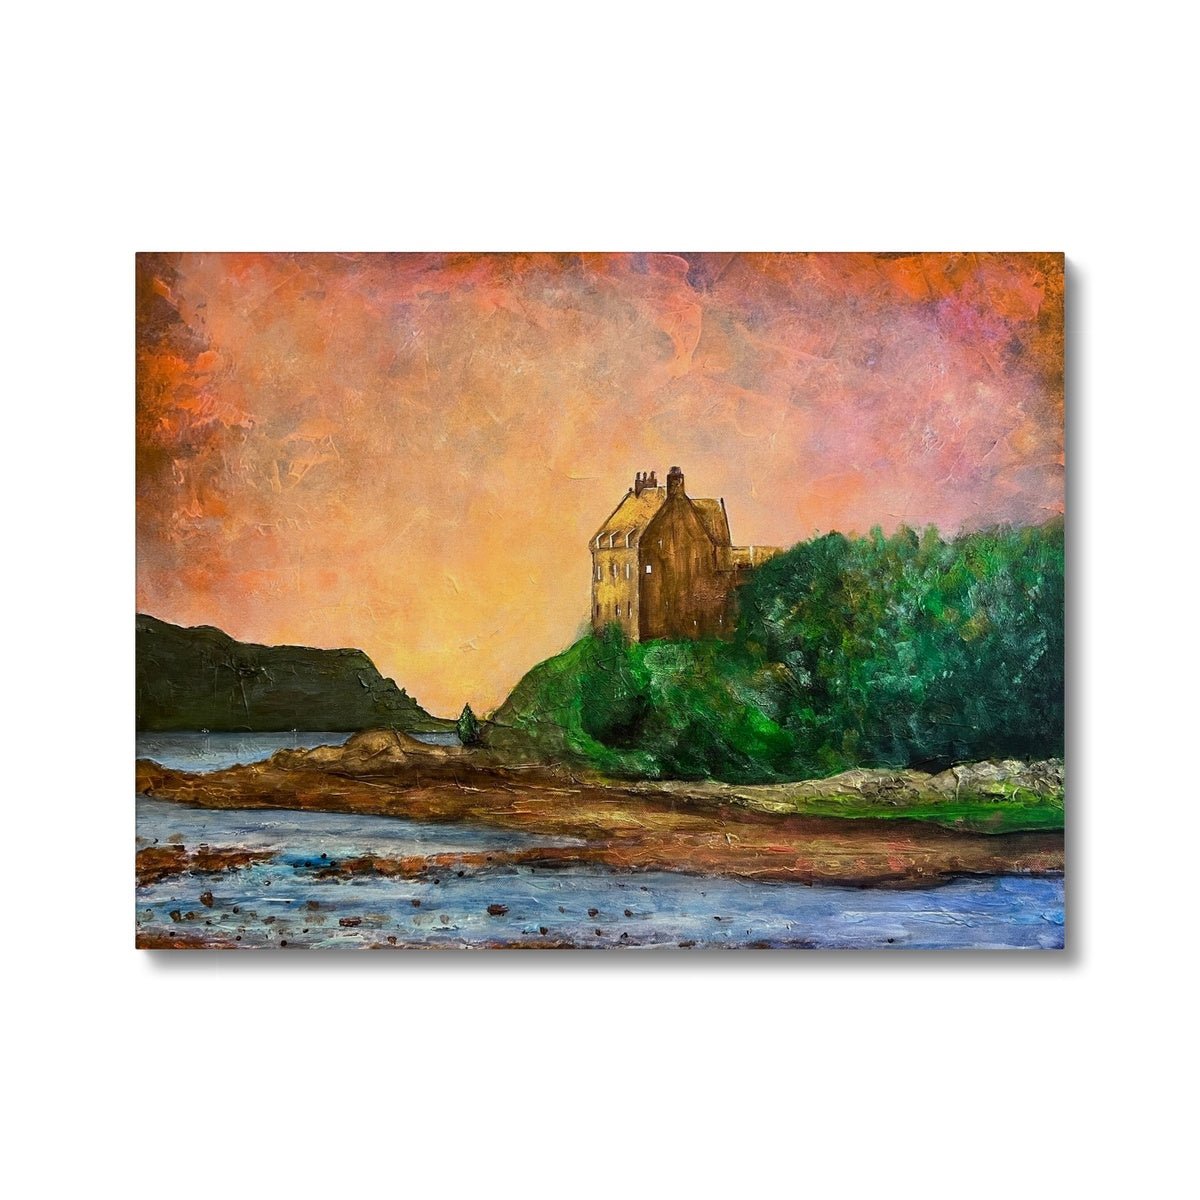 Duntrune Castle Painting | Canvas From Scotland-Contemporary Stretched Canvas Prints-Scottish Castles Art Gallery-24"x18"-Paintings, Prints, Homeware, Art Gifts From Scotland By Scottish Artist Kevin Hunter